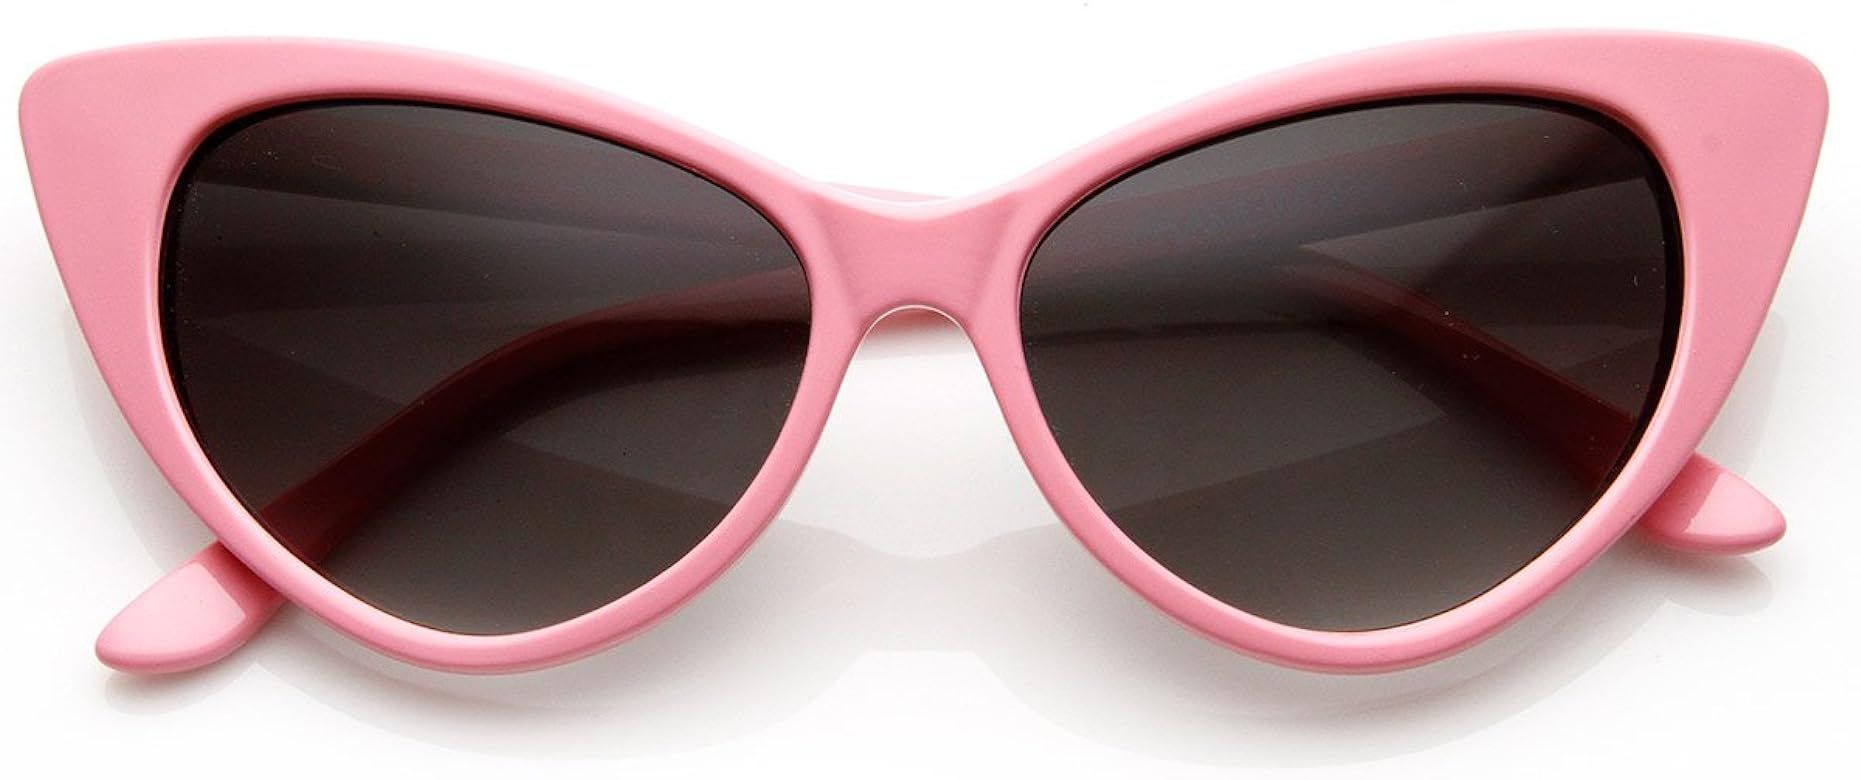 Super Cateyes Vintage Inspired Fashion Mod Chic High Pointed Cat-Eye Sunglasses | Amazon (US)